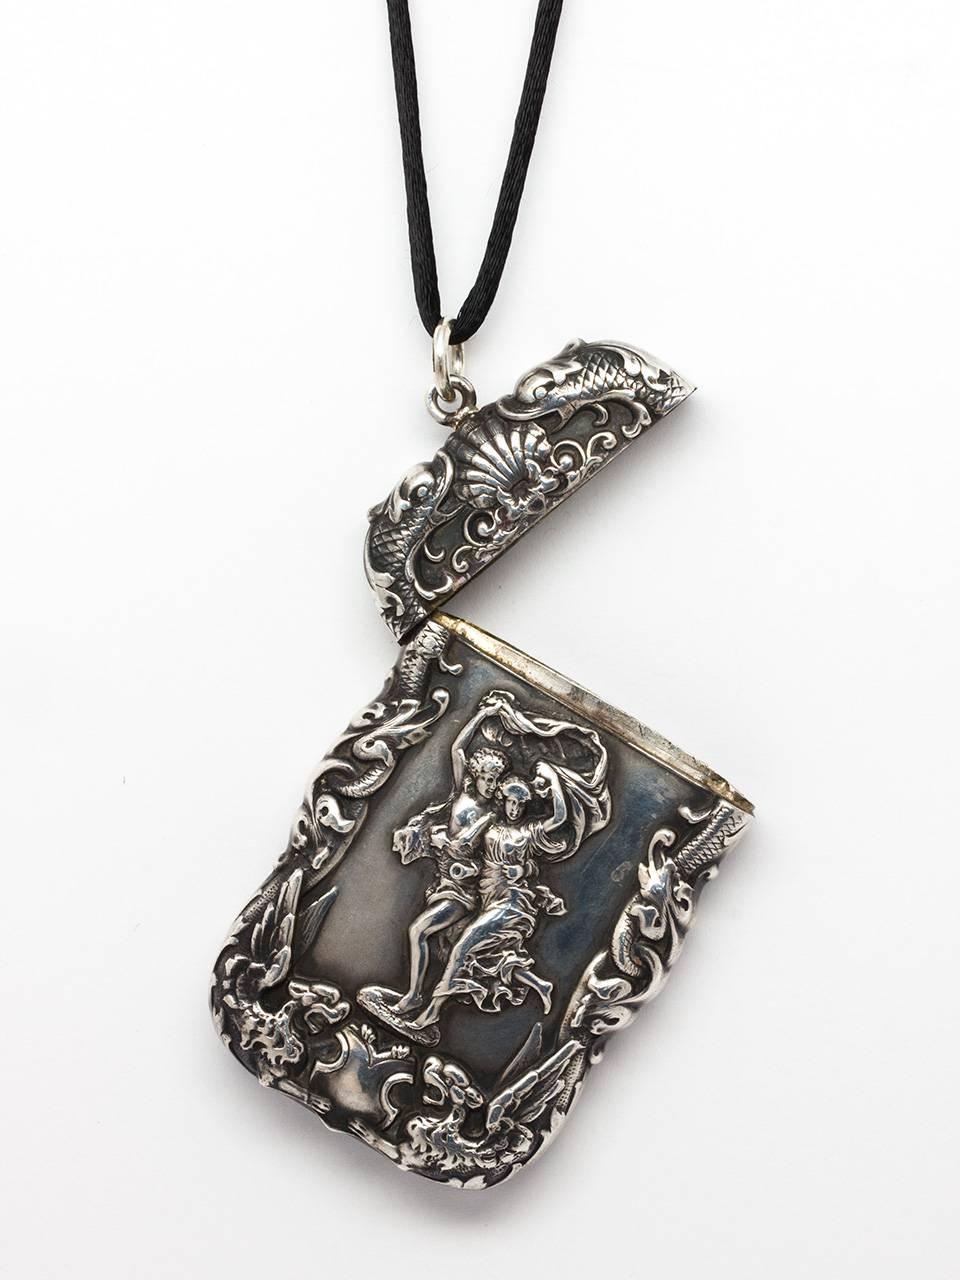 Fantastic, sterling silver Art Nouveau match safe pendant. In a highly intricate repousse design of God and Goddess, griffins, shells and sea serpents. Gorgeous hand engraved monogram on opposite side G E W. This beautifully executed antique match